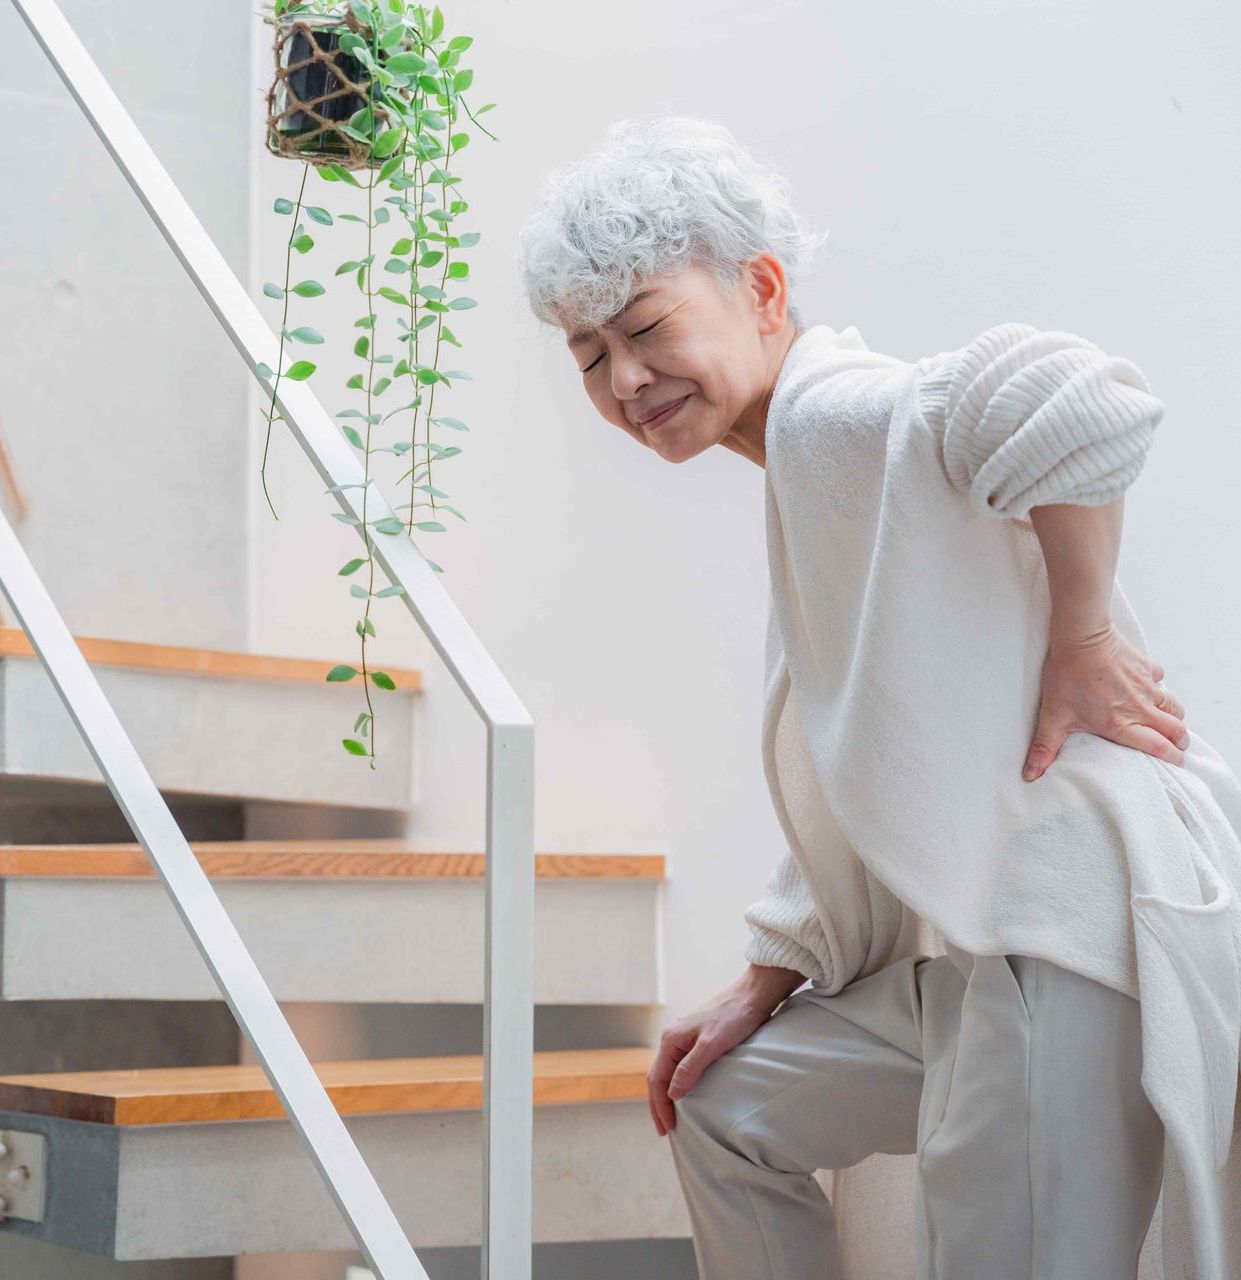 Before picture is an elderly woman in pain while climbing stairs.